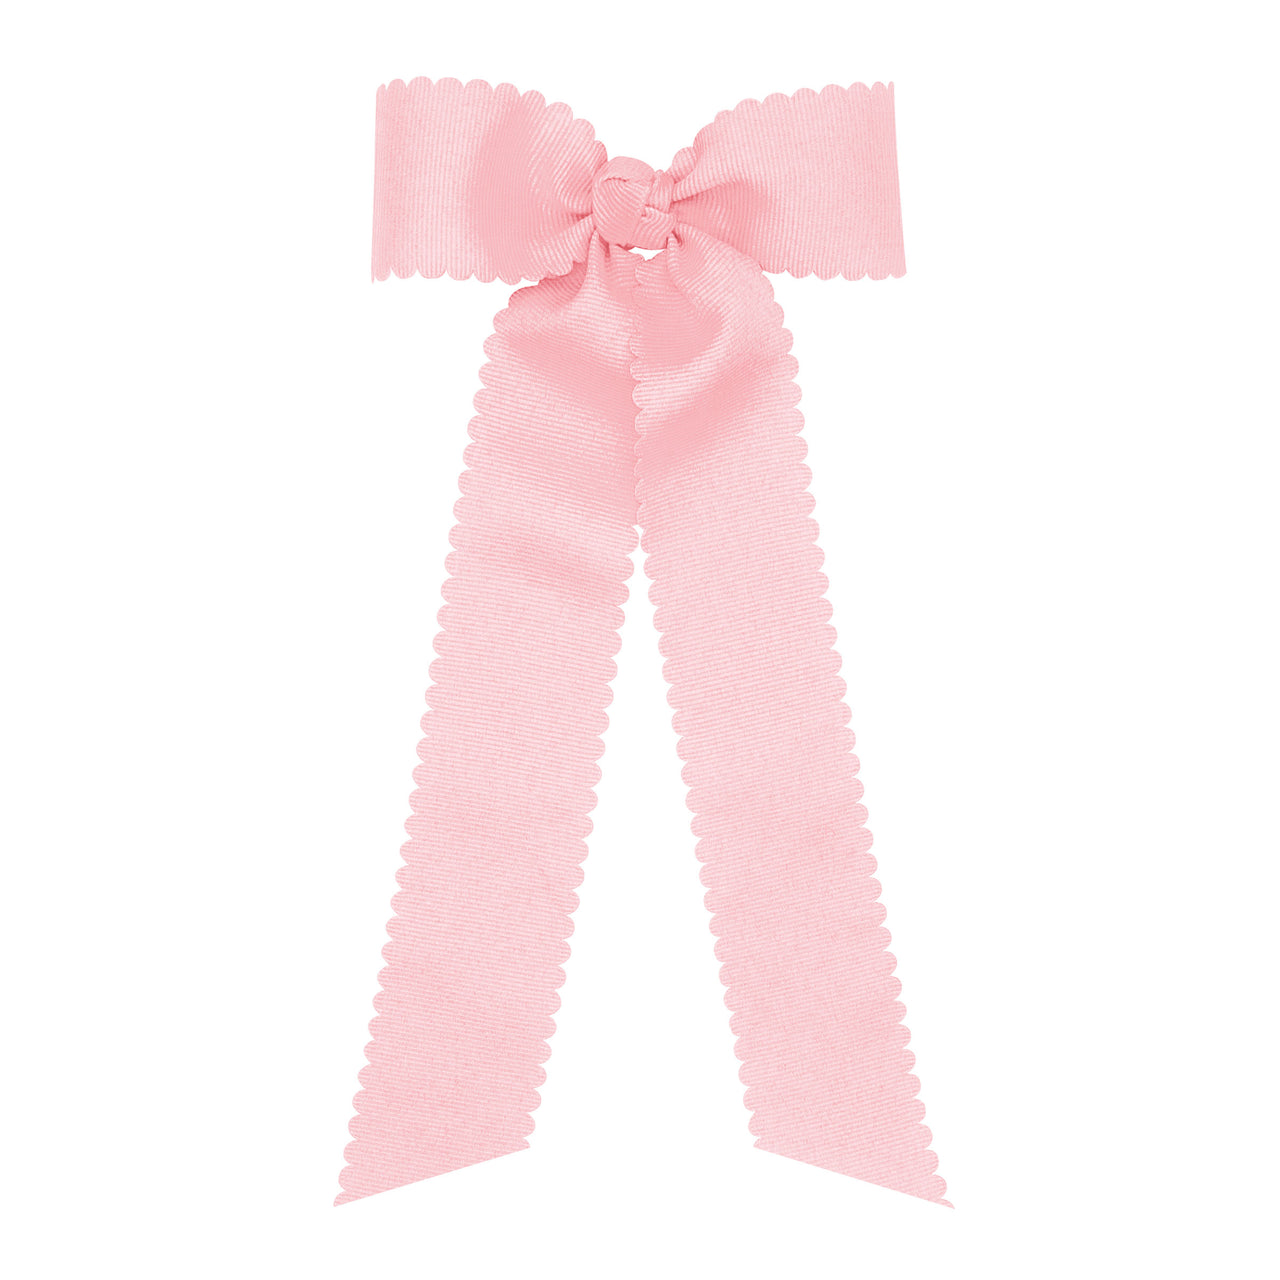 Wee Ones Medium Grosgrain Bow w/ Tails & Scalloped Edge